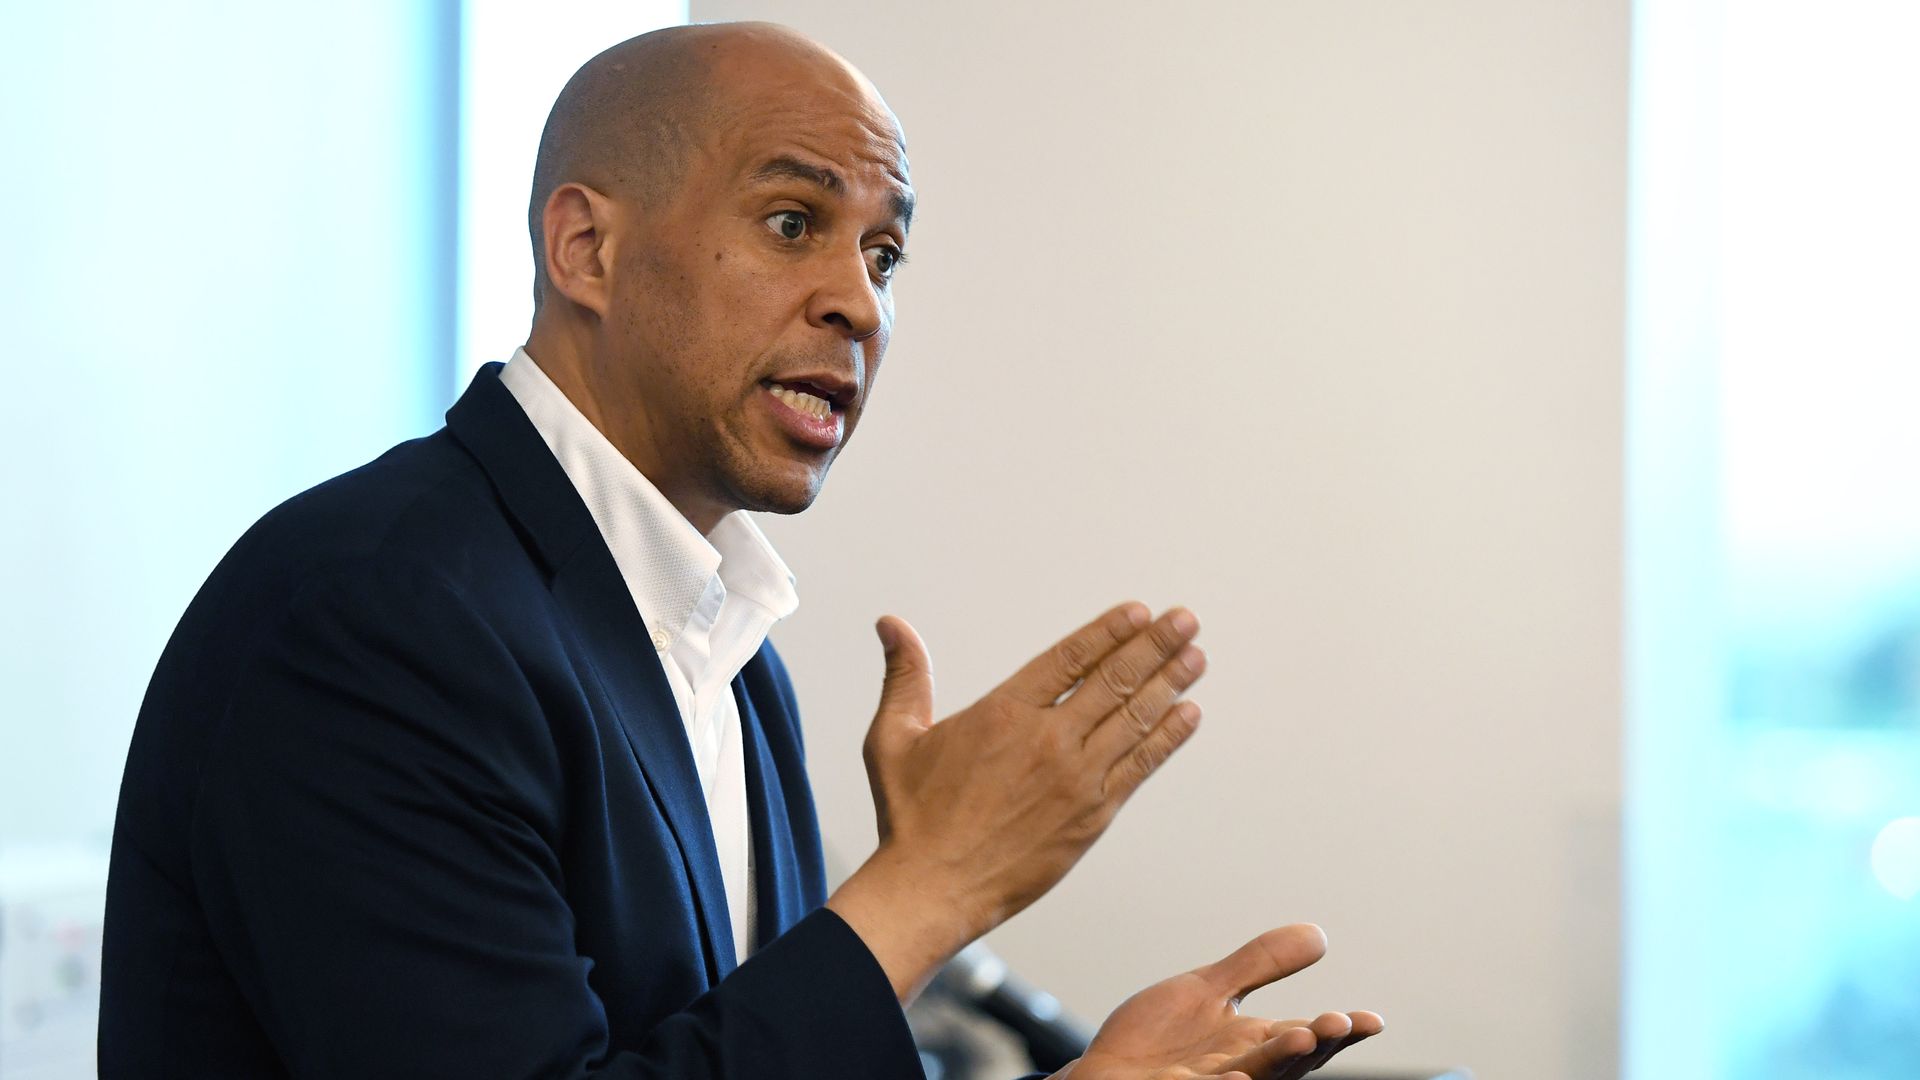  Cory Booker's speech was interrupted when a van plowed into the strip mall where he was speaking.